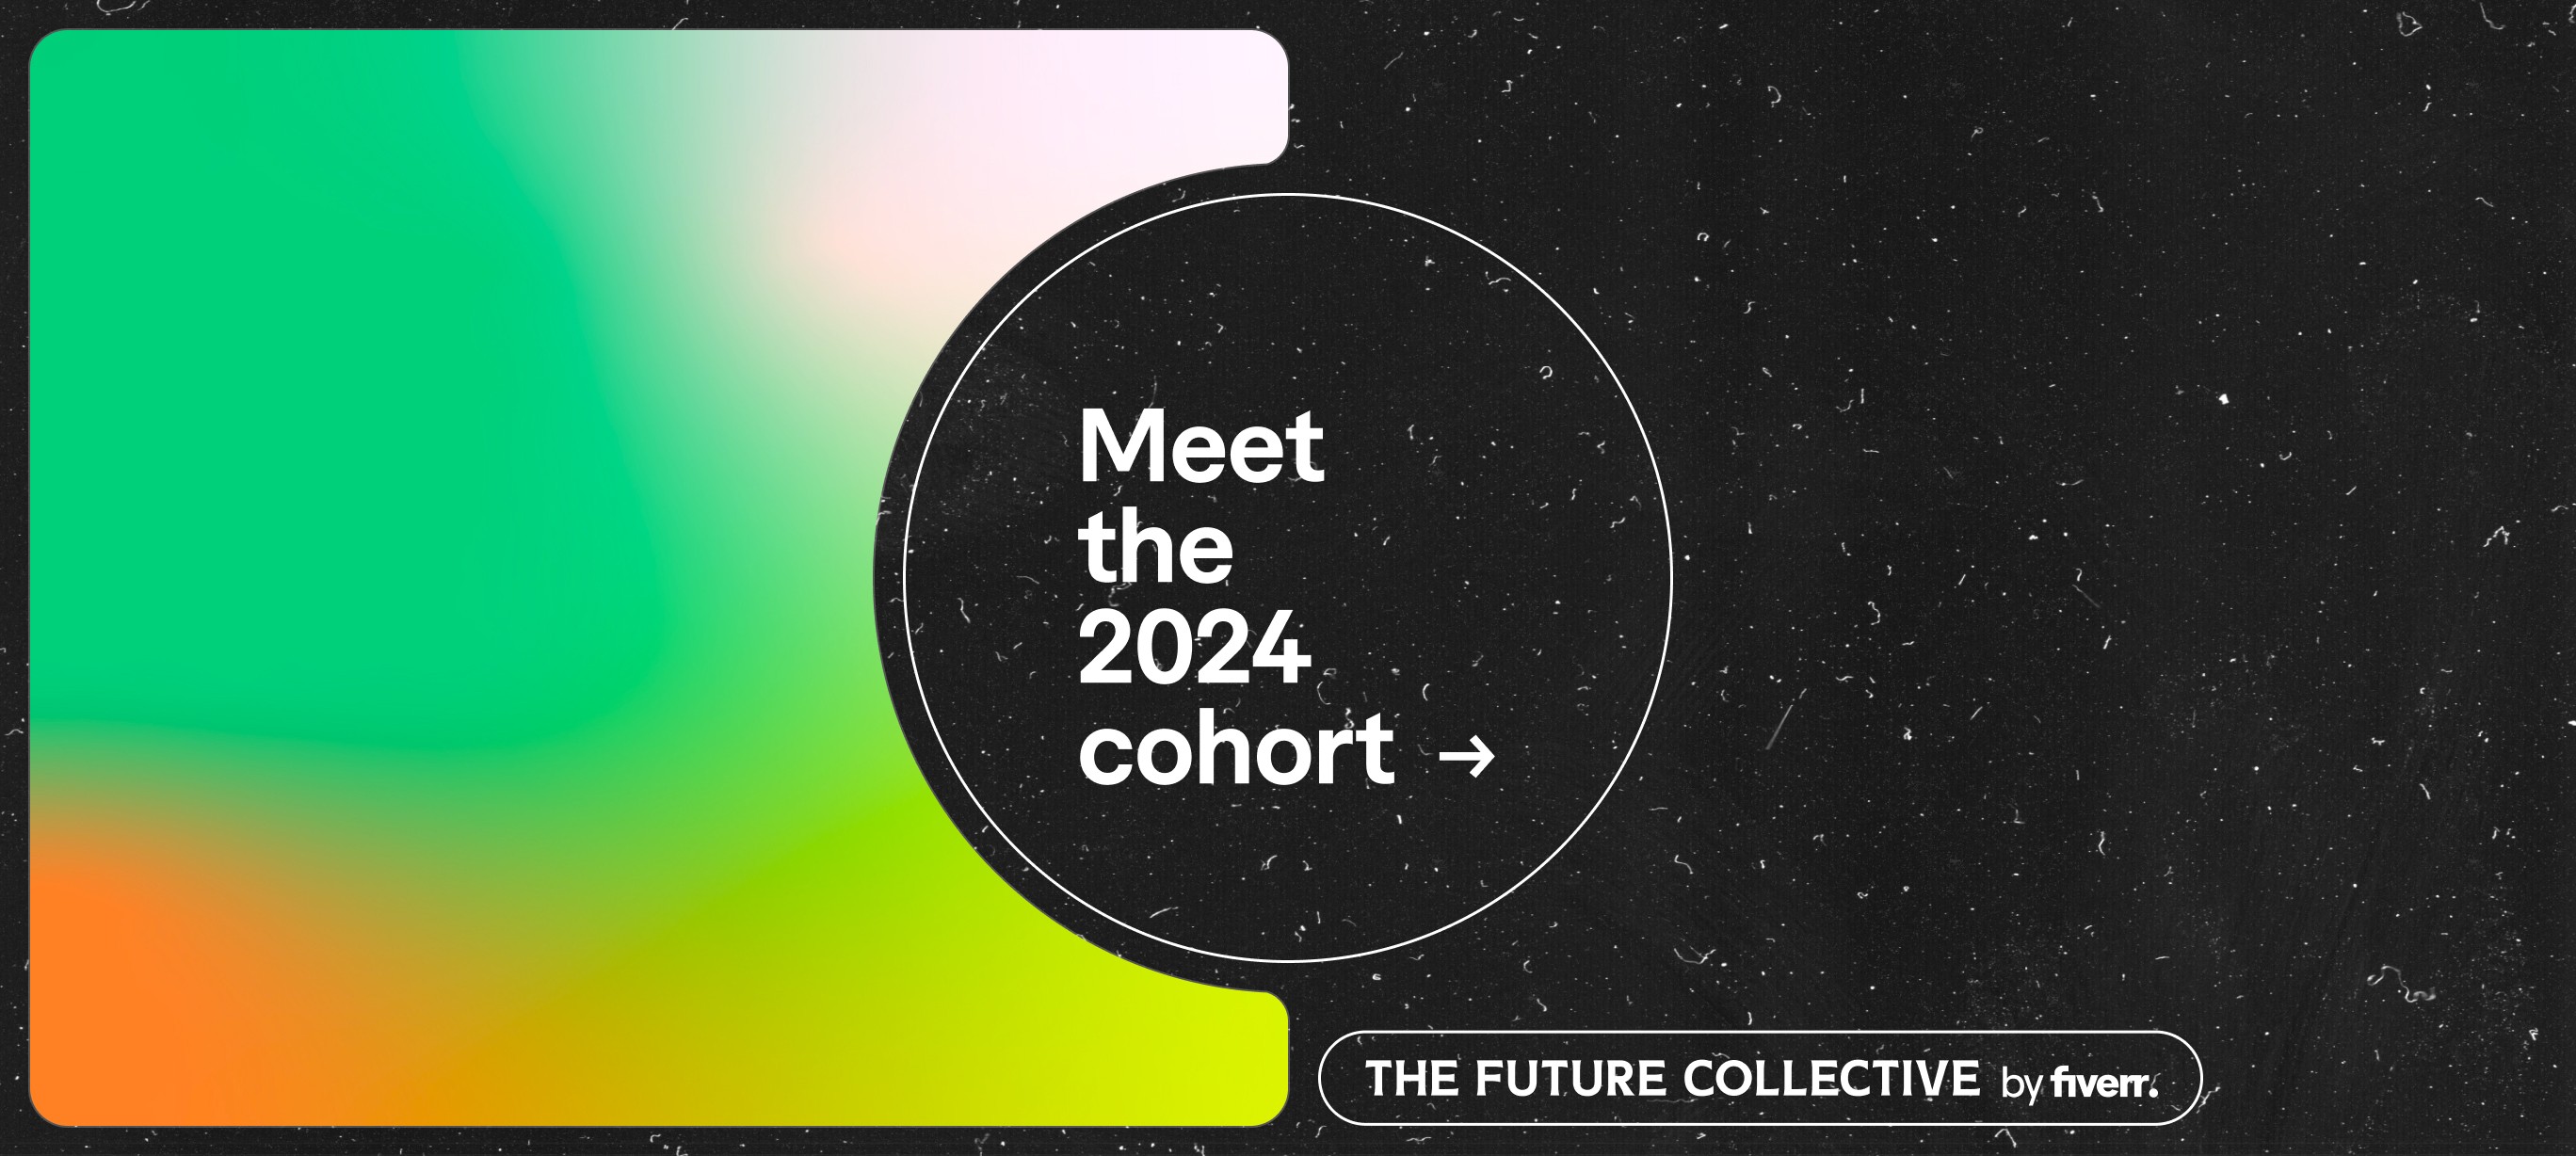 Fiverr Launches the Third Annual Future Collective Business Accelerator Program, Unveils New Cohort